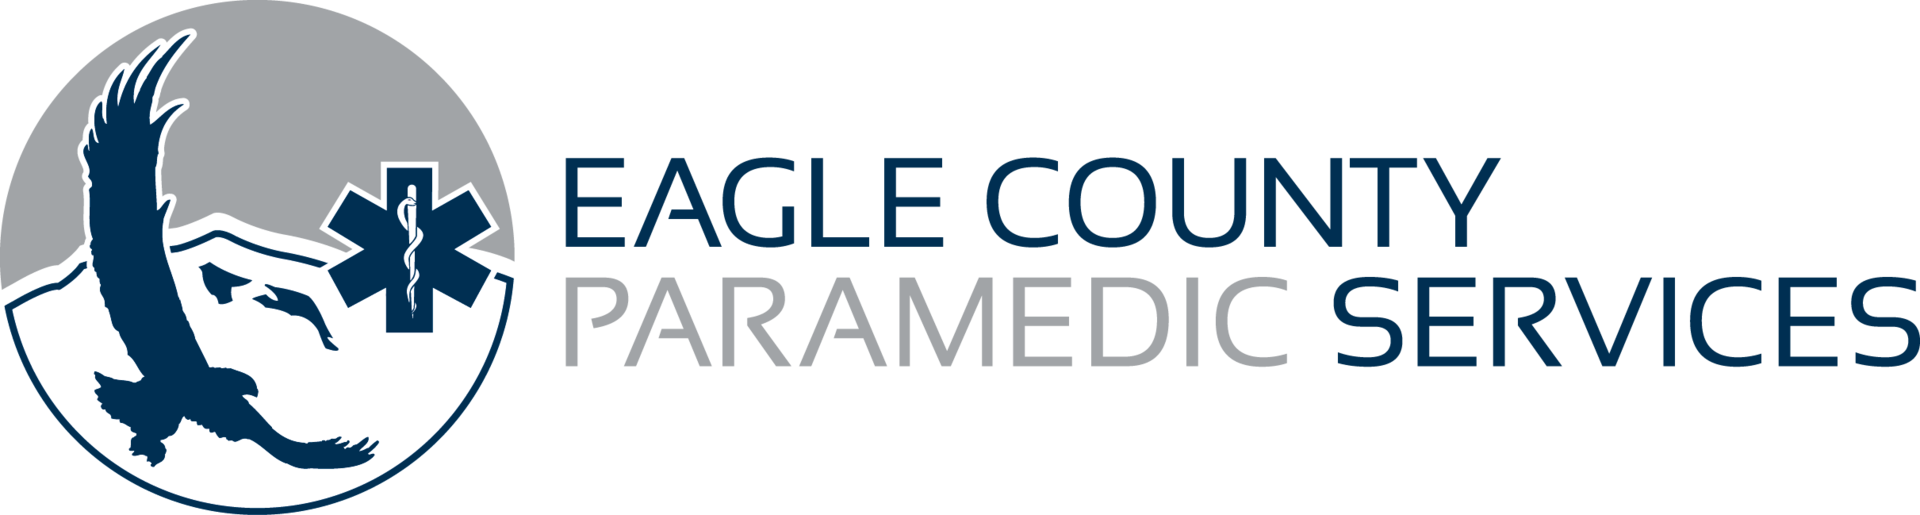 Eagle County Paramedic Services Logo PNG